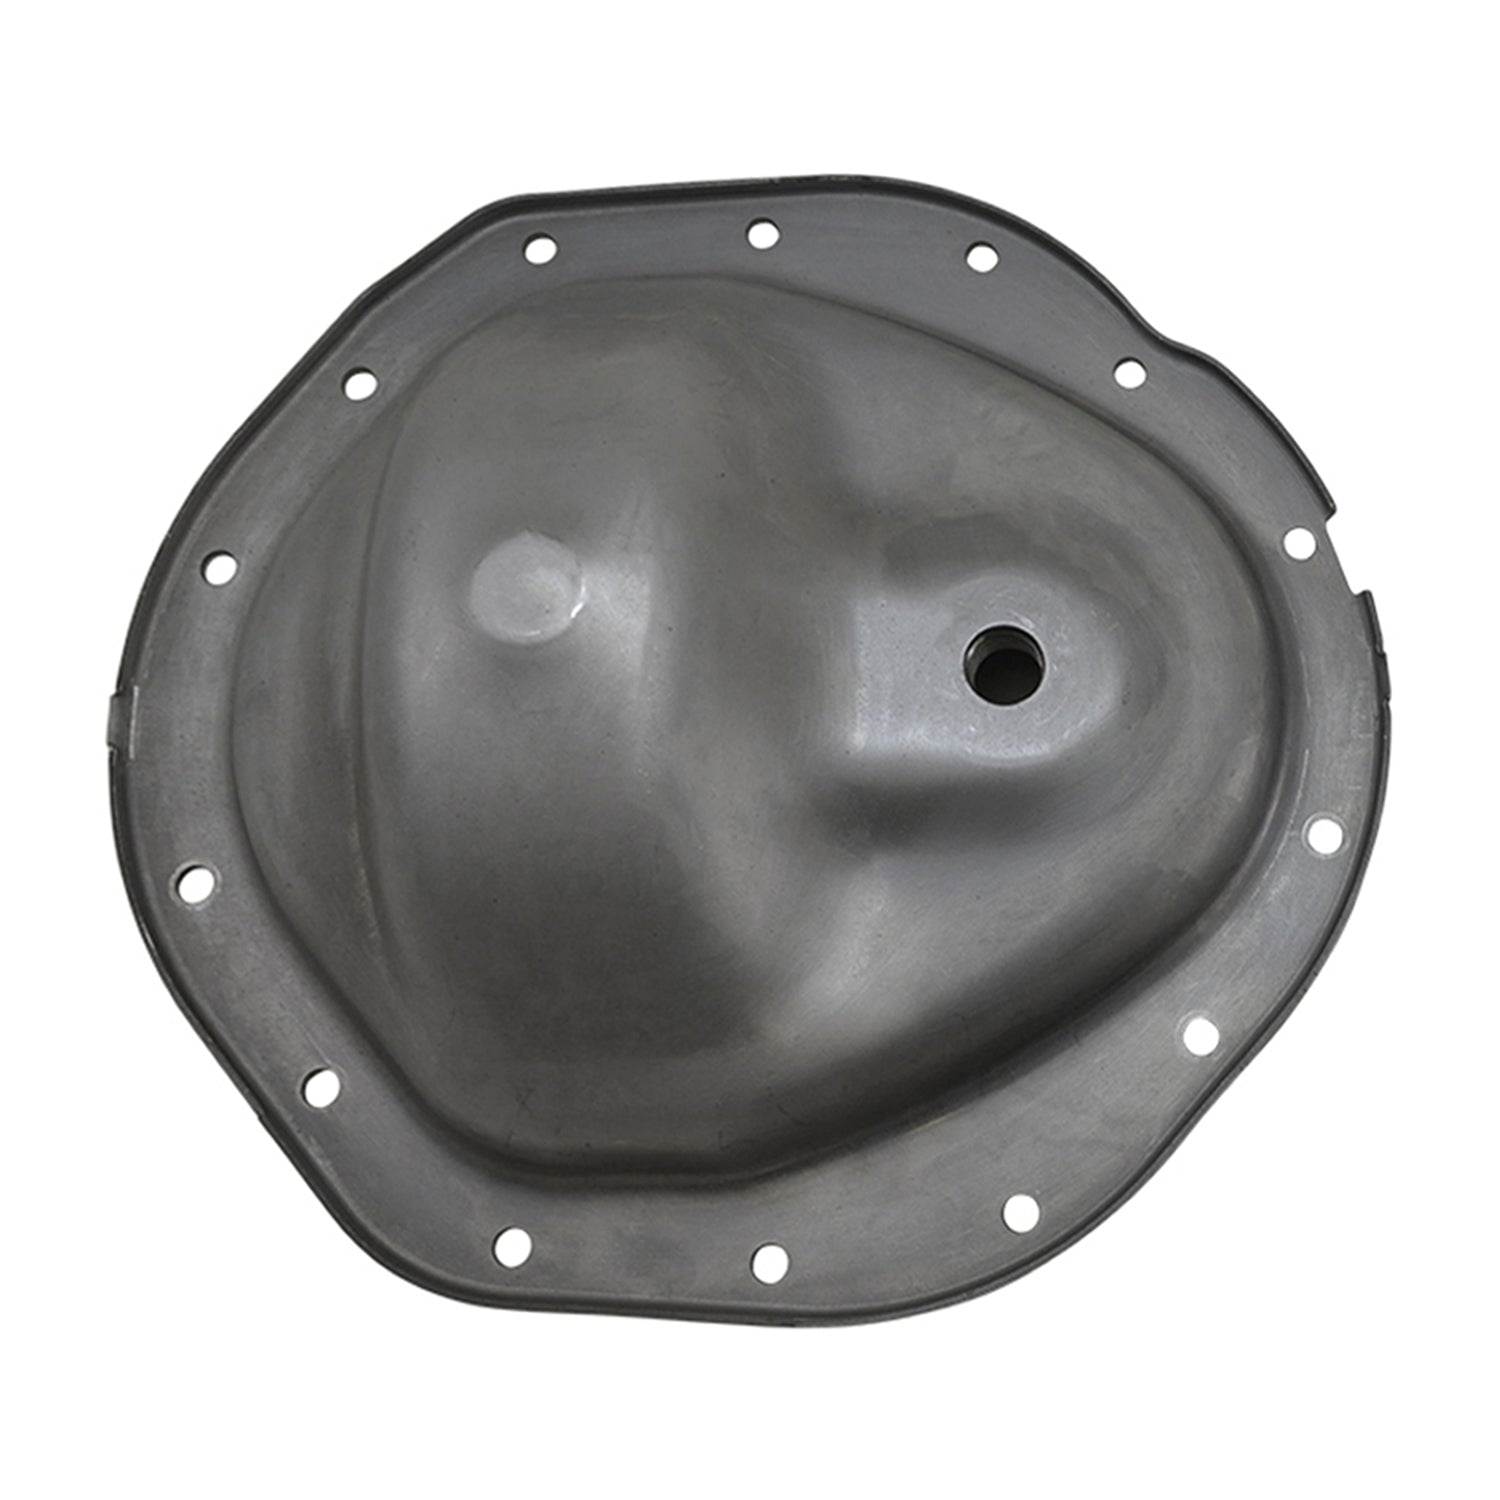 Yukon Gear Dodge Ram (4WD) Differential Cover - Front YPC5-C9.25-F